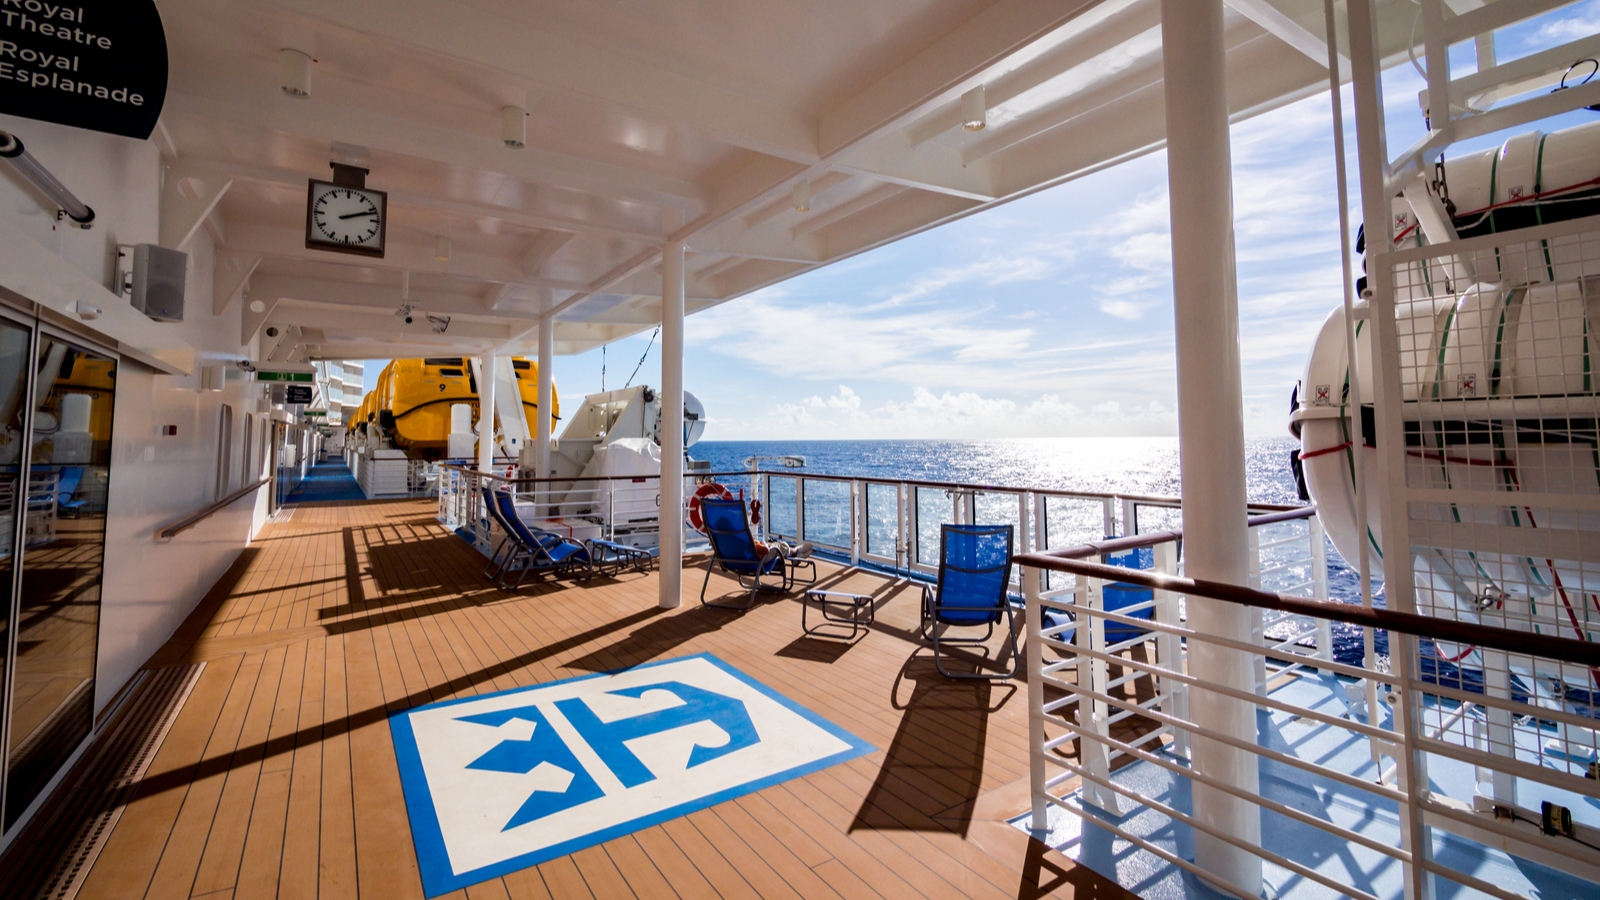 Deck of a Royal Caribbean (RCL Stock) cruise ship looking over the ocean